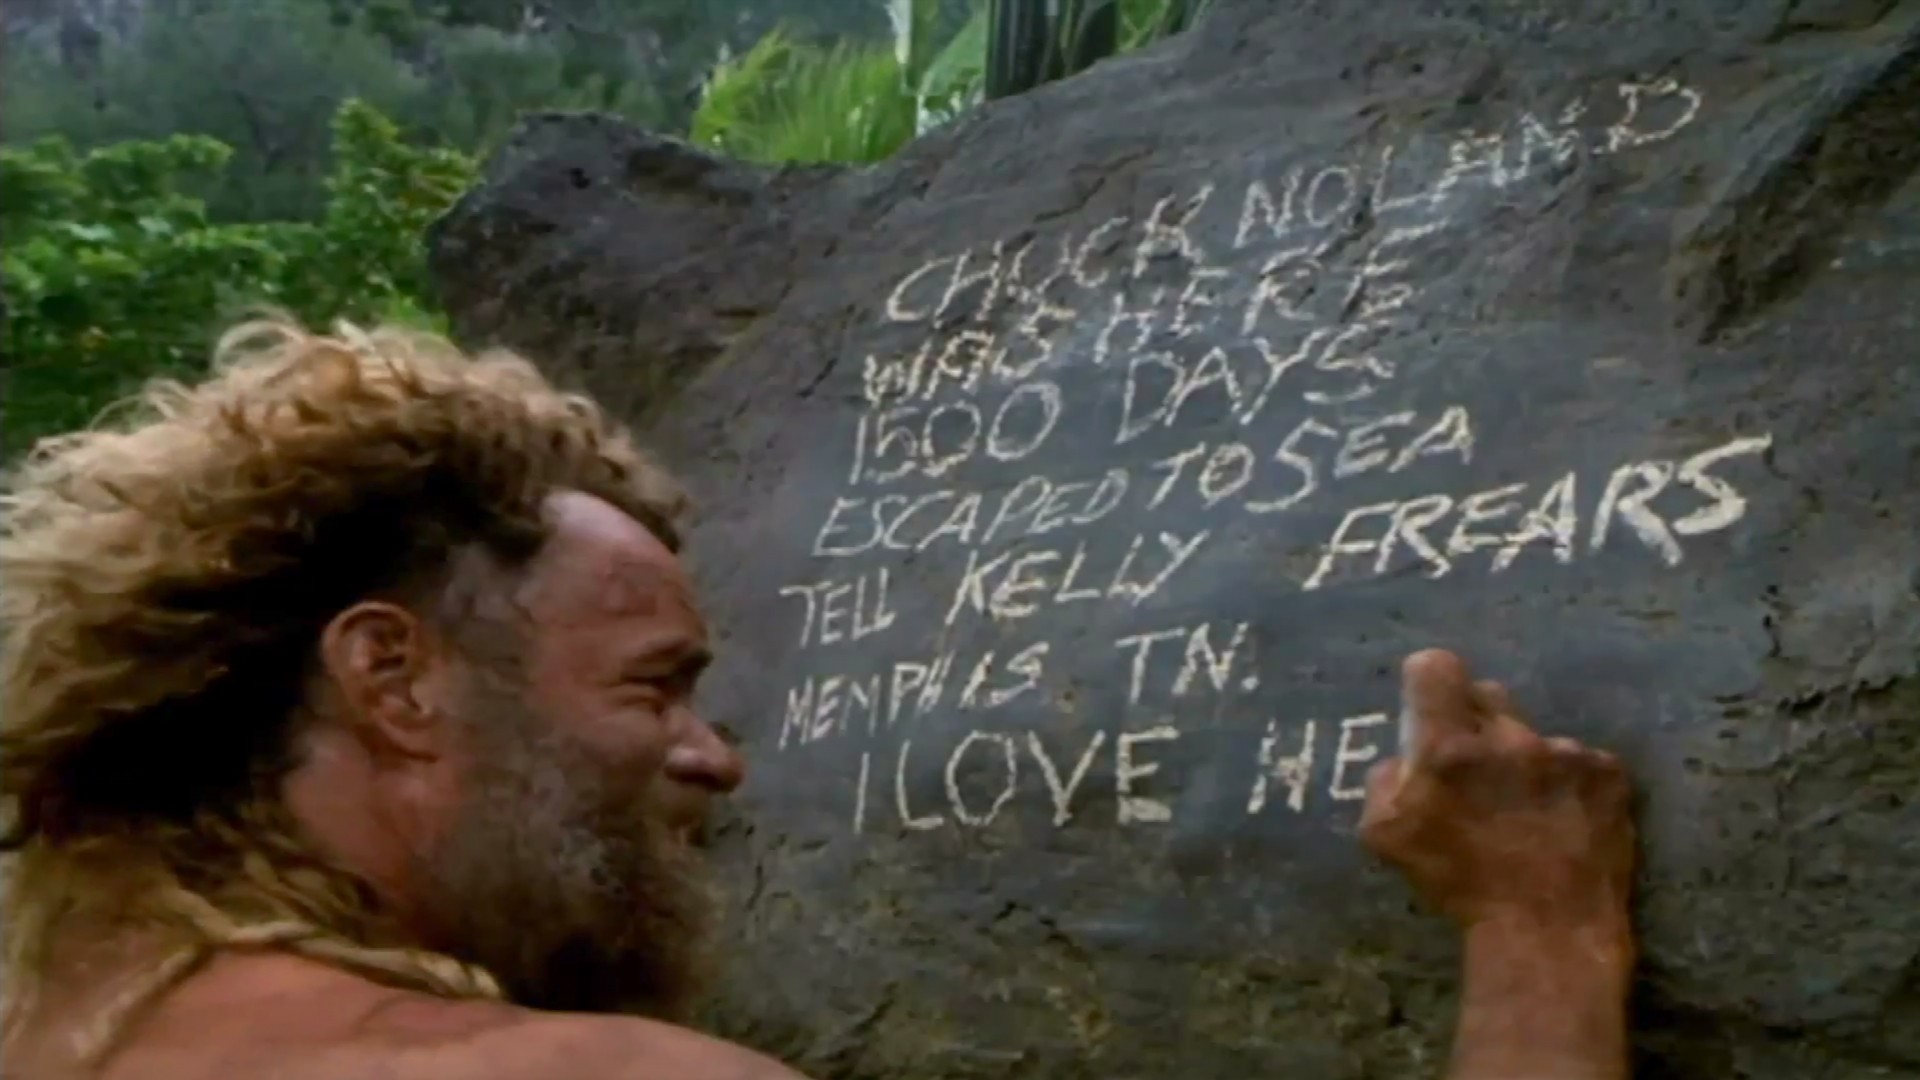 cast away quotes keep breathing